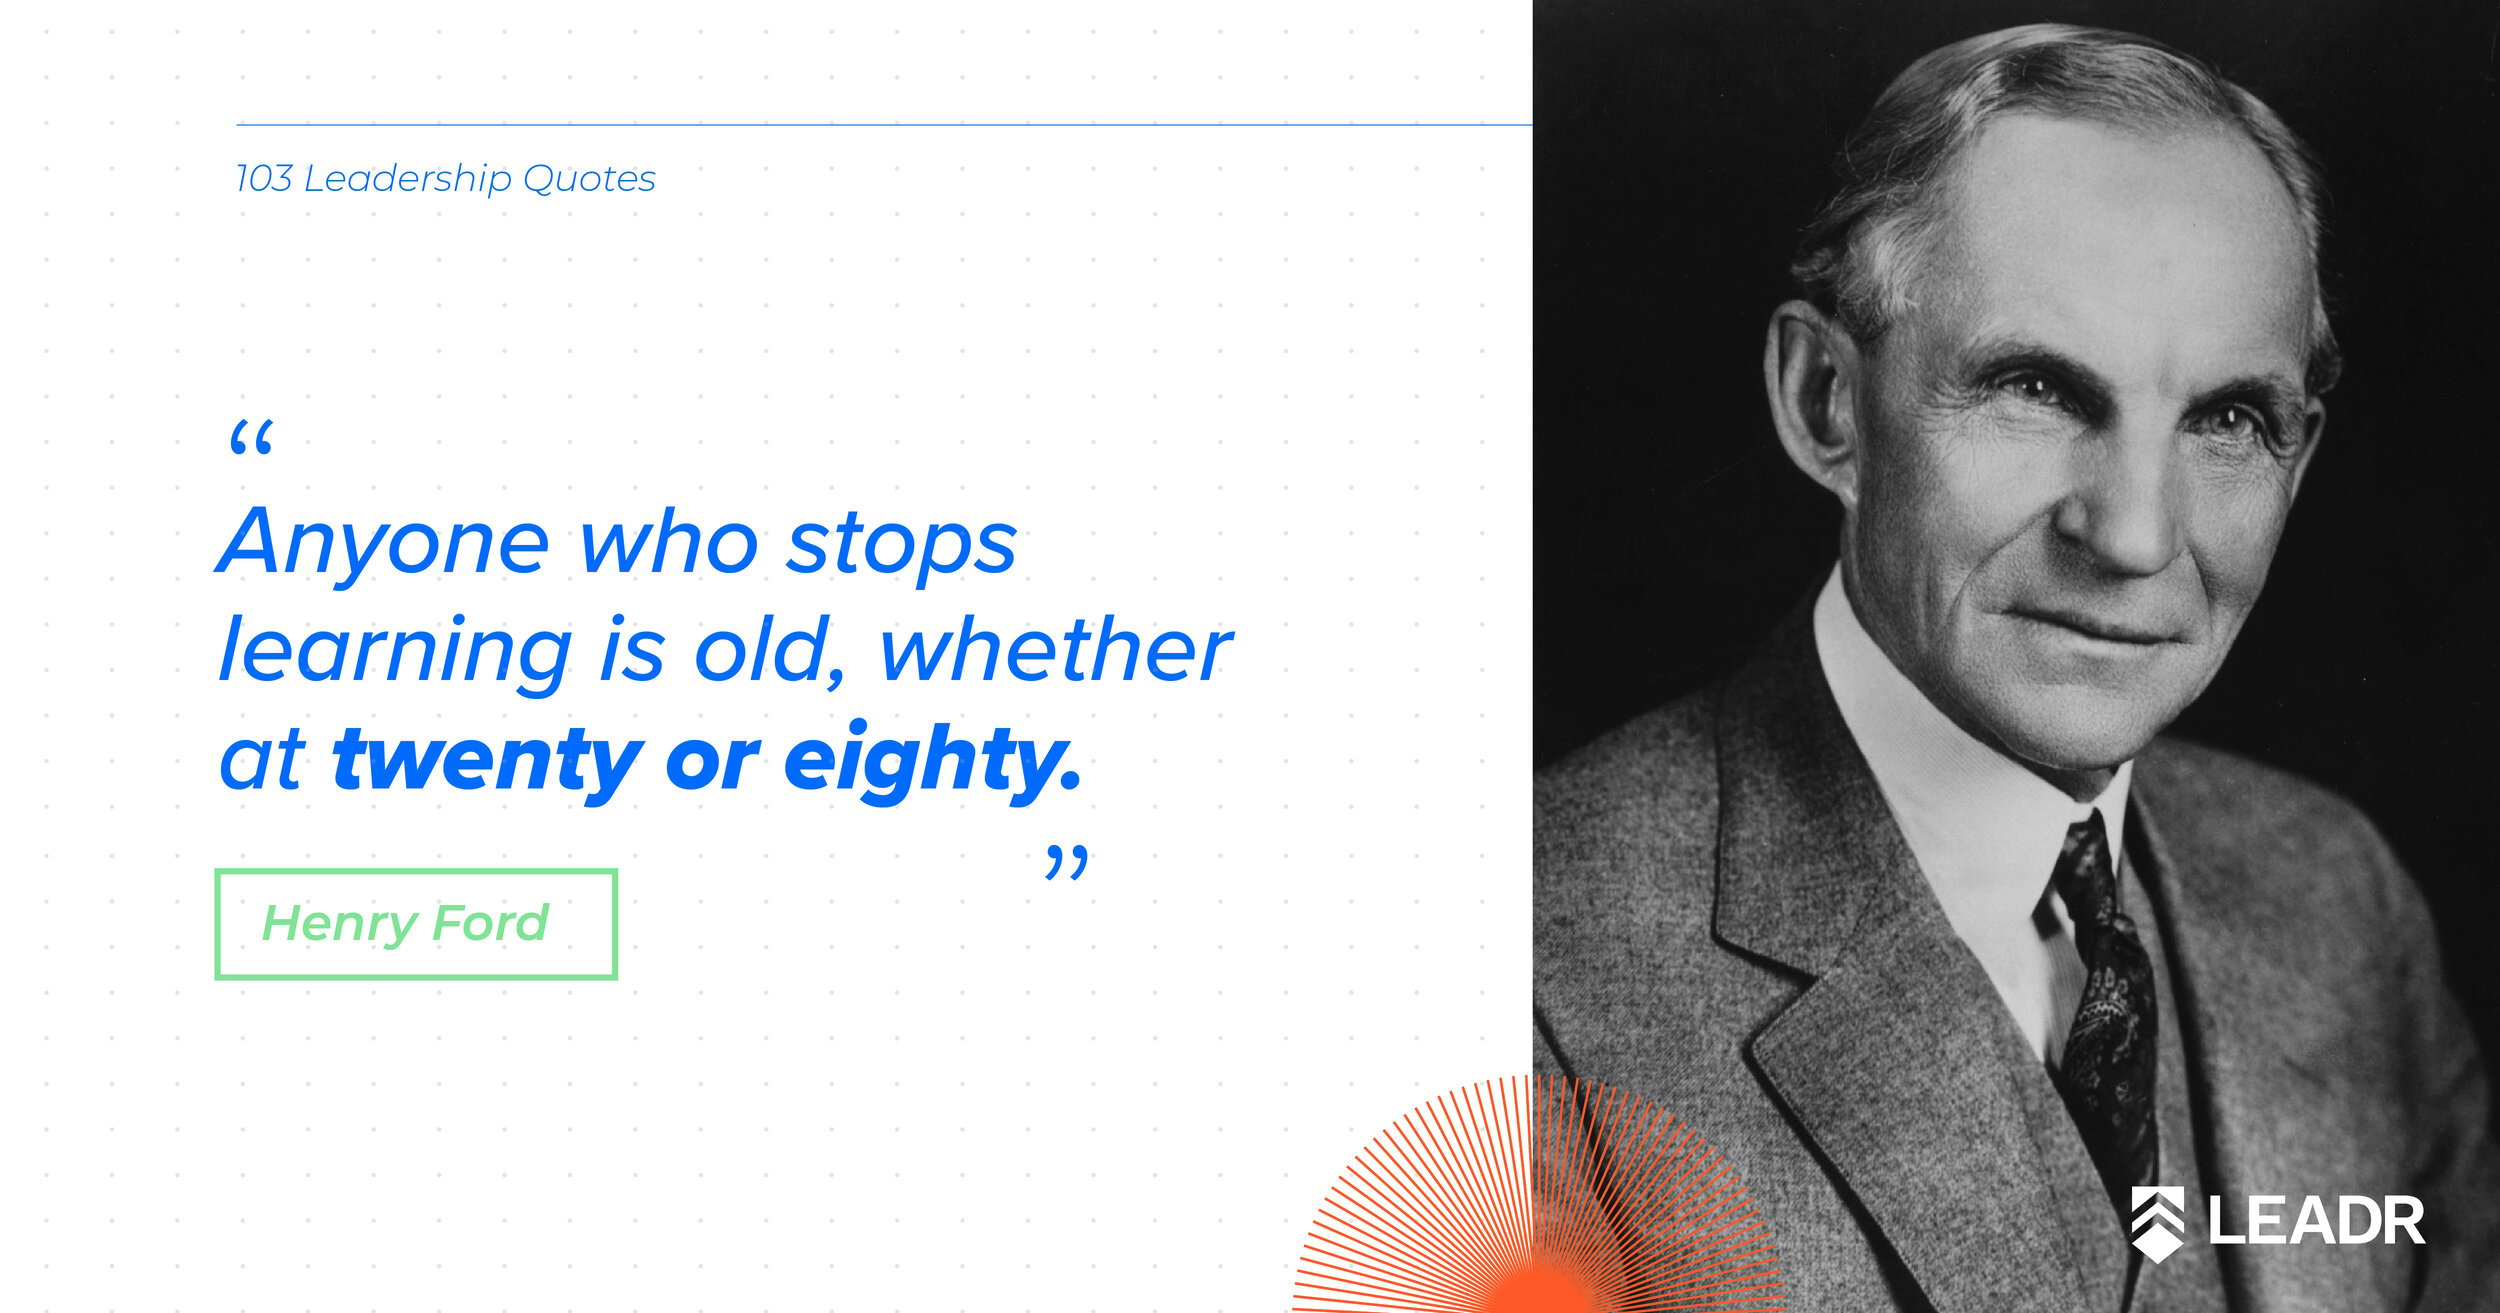 Royalty free downloadable leadership quotes - Henry Ford